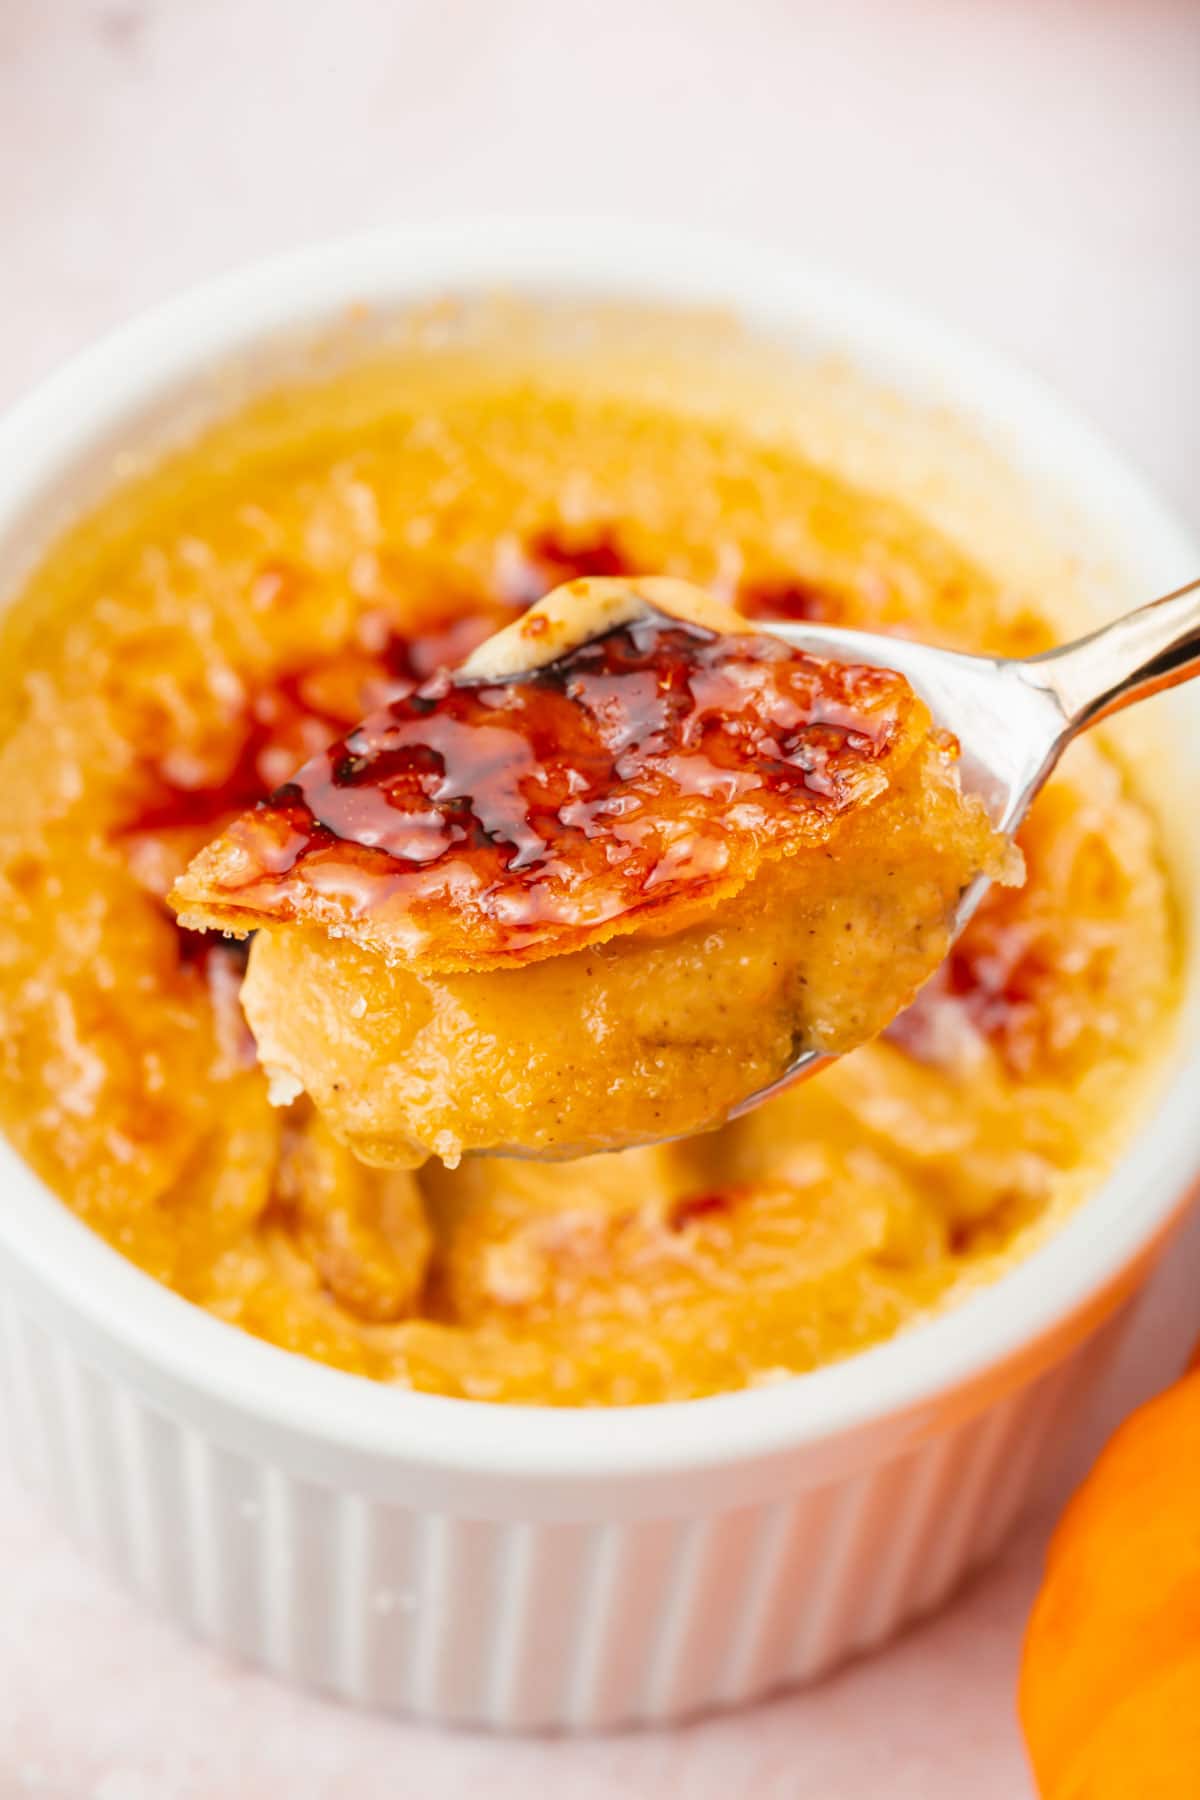 A spoonful of pumpkin crème brûlée with a creamy filling and crackle crust topping.